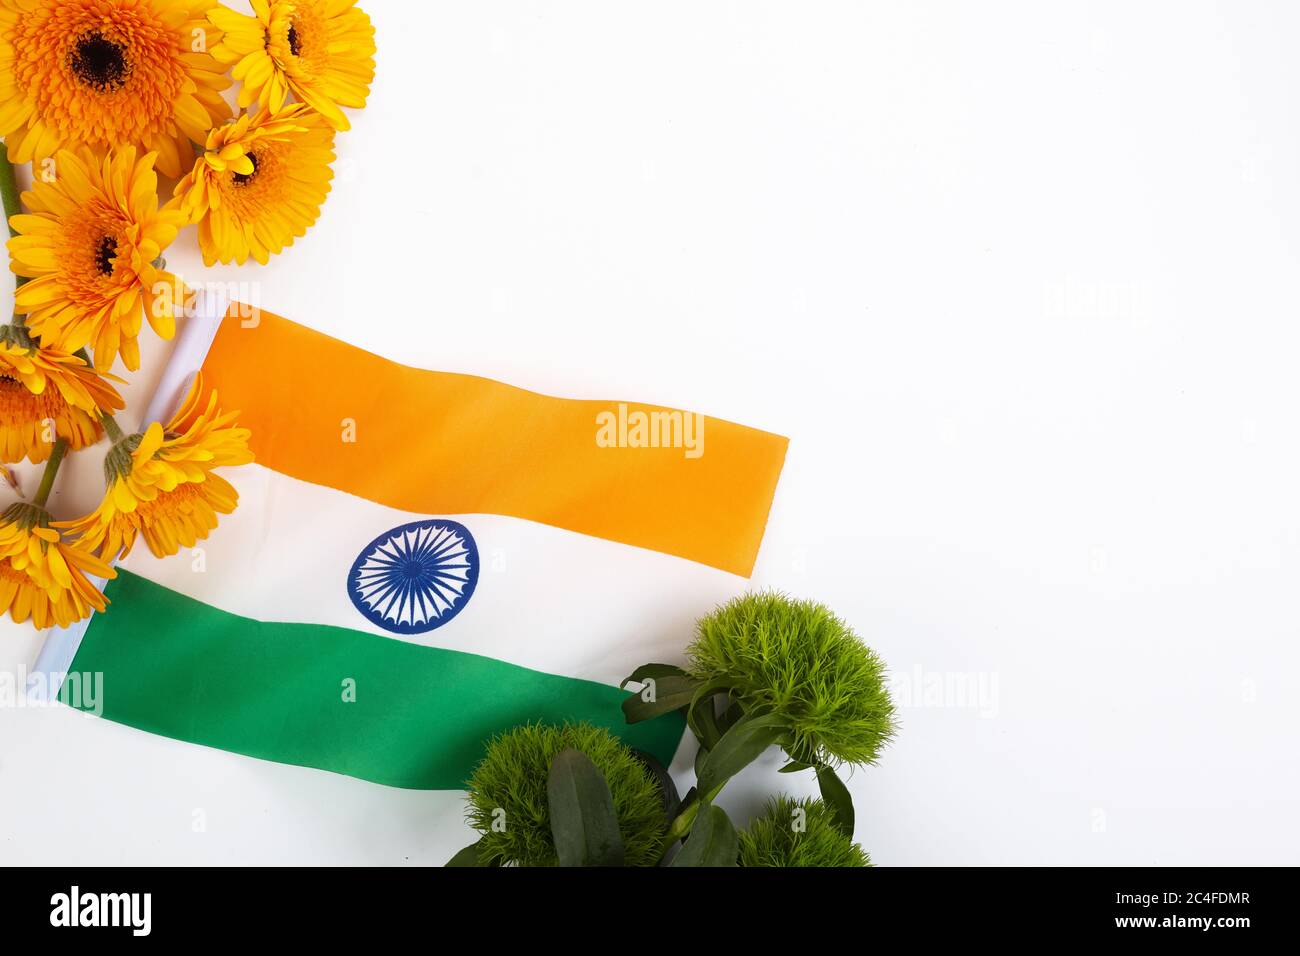 Abstract pattern with orange and green flowers frame on white background.  India independence day background Stock Photo - Alamy